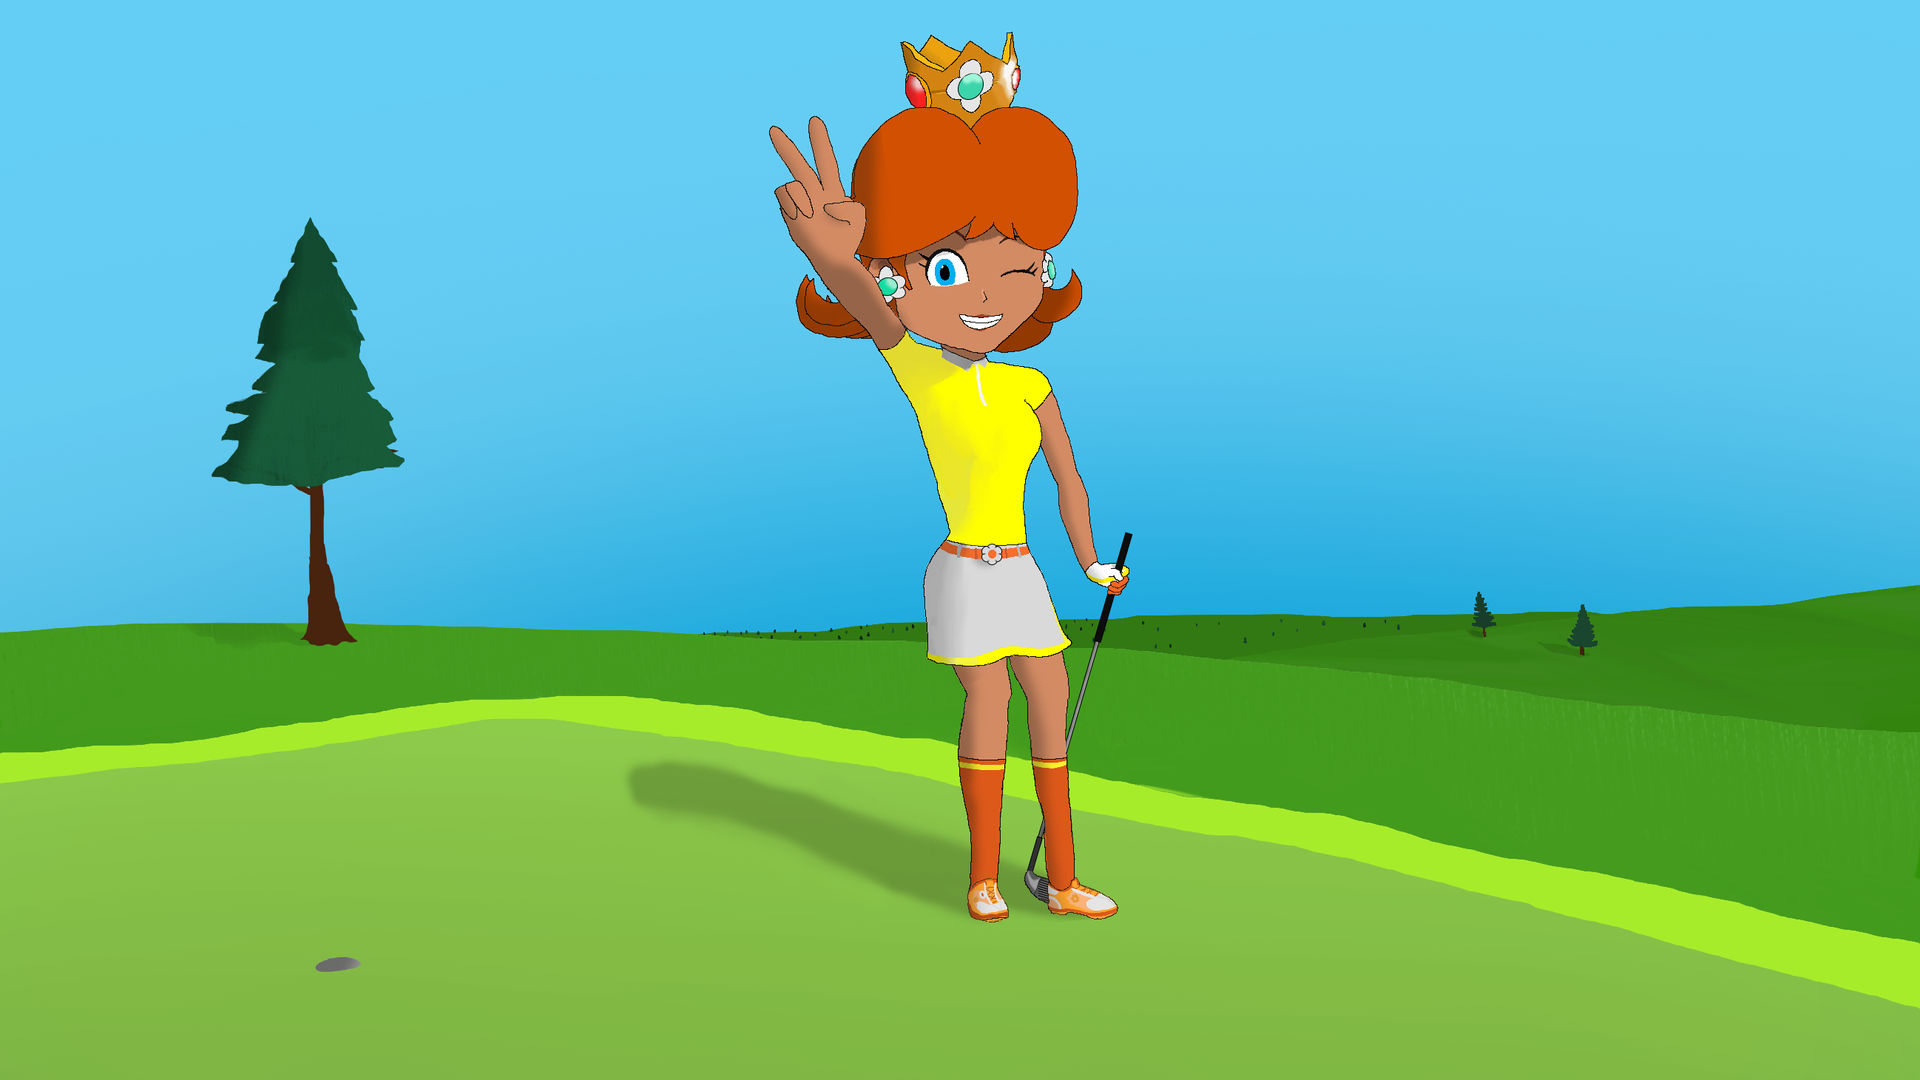 Daisy's day at Golf by ScreamingClock on DeviantArt